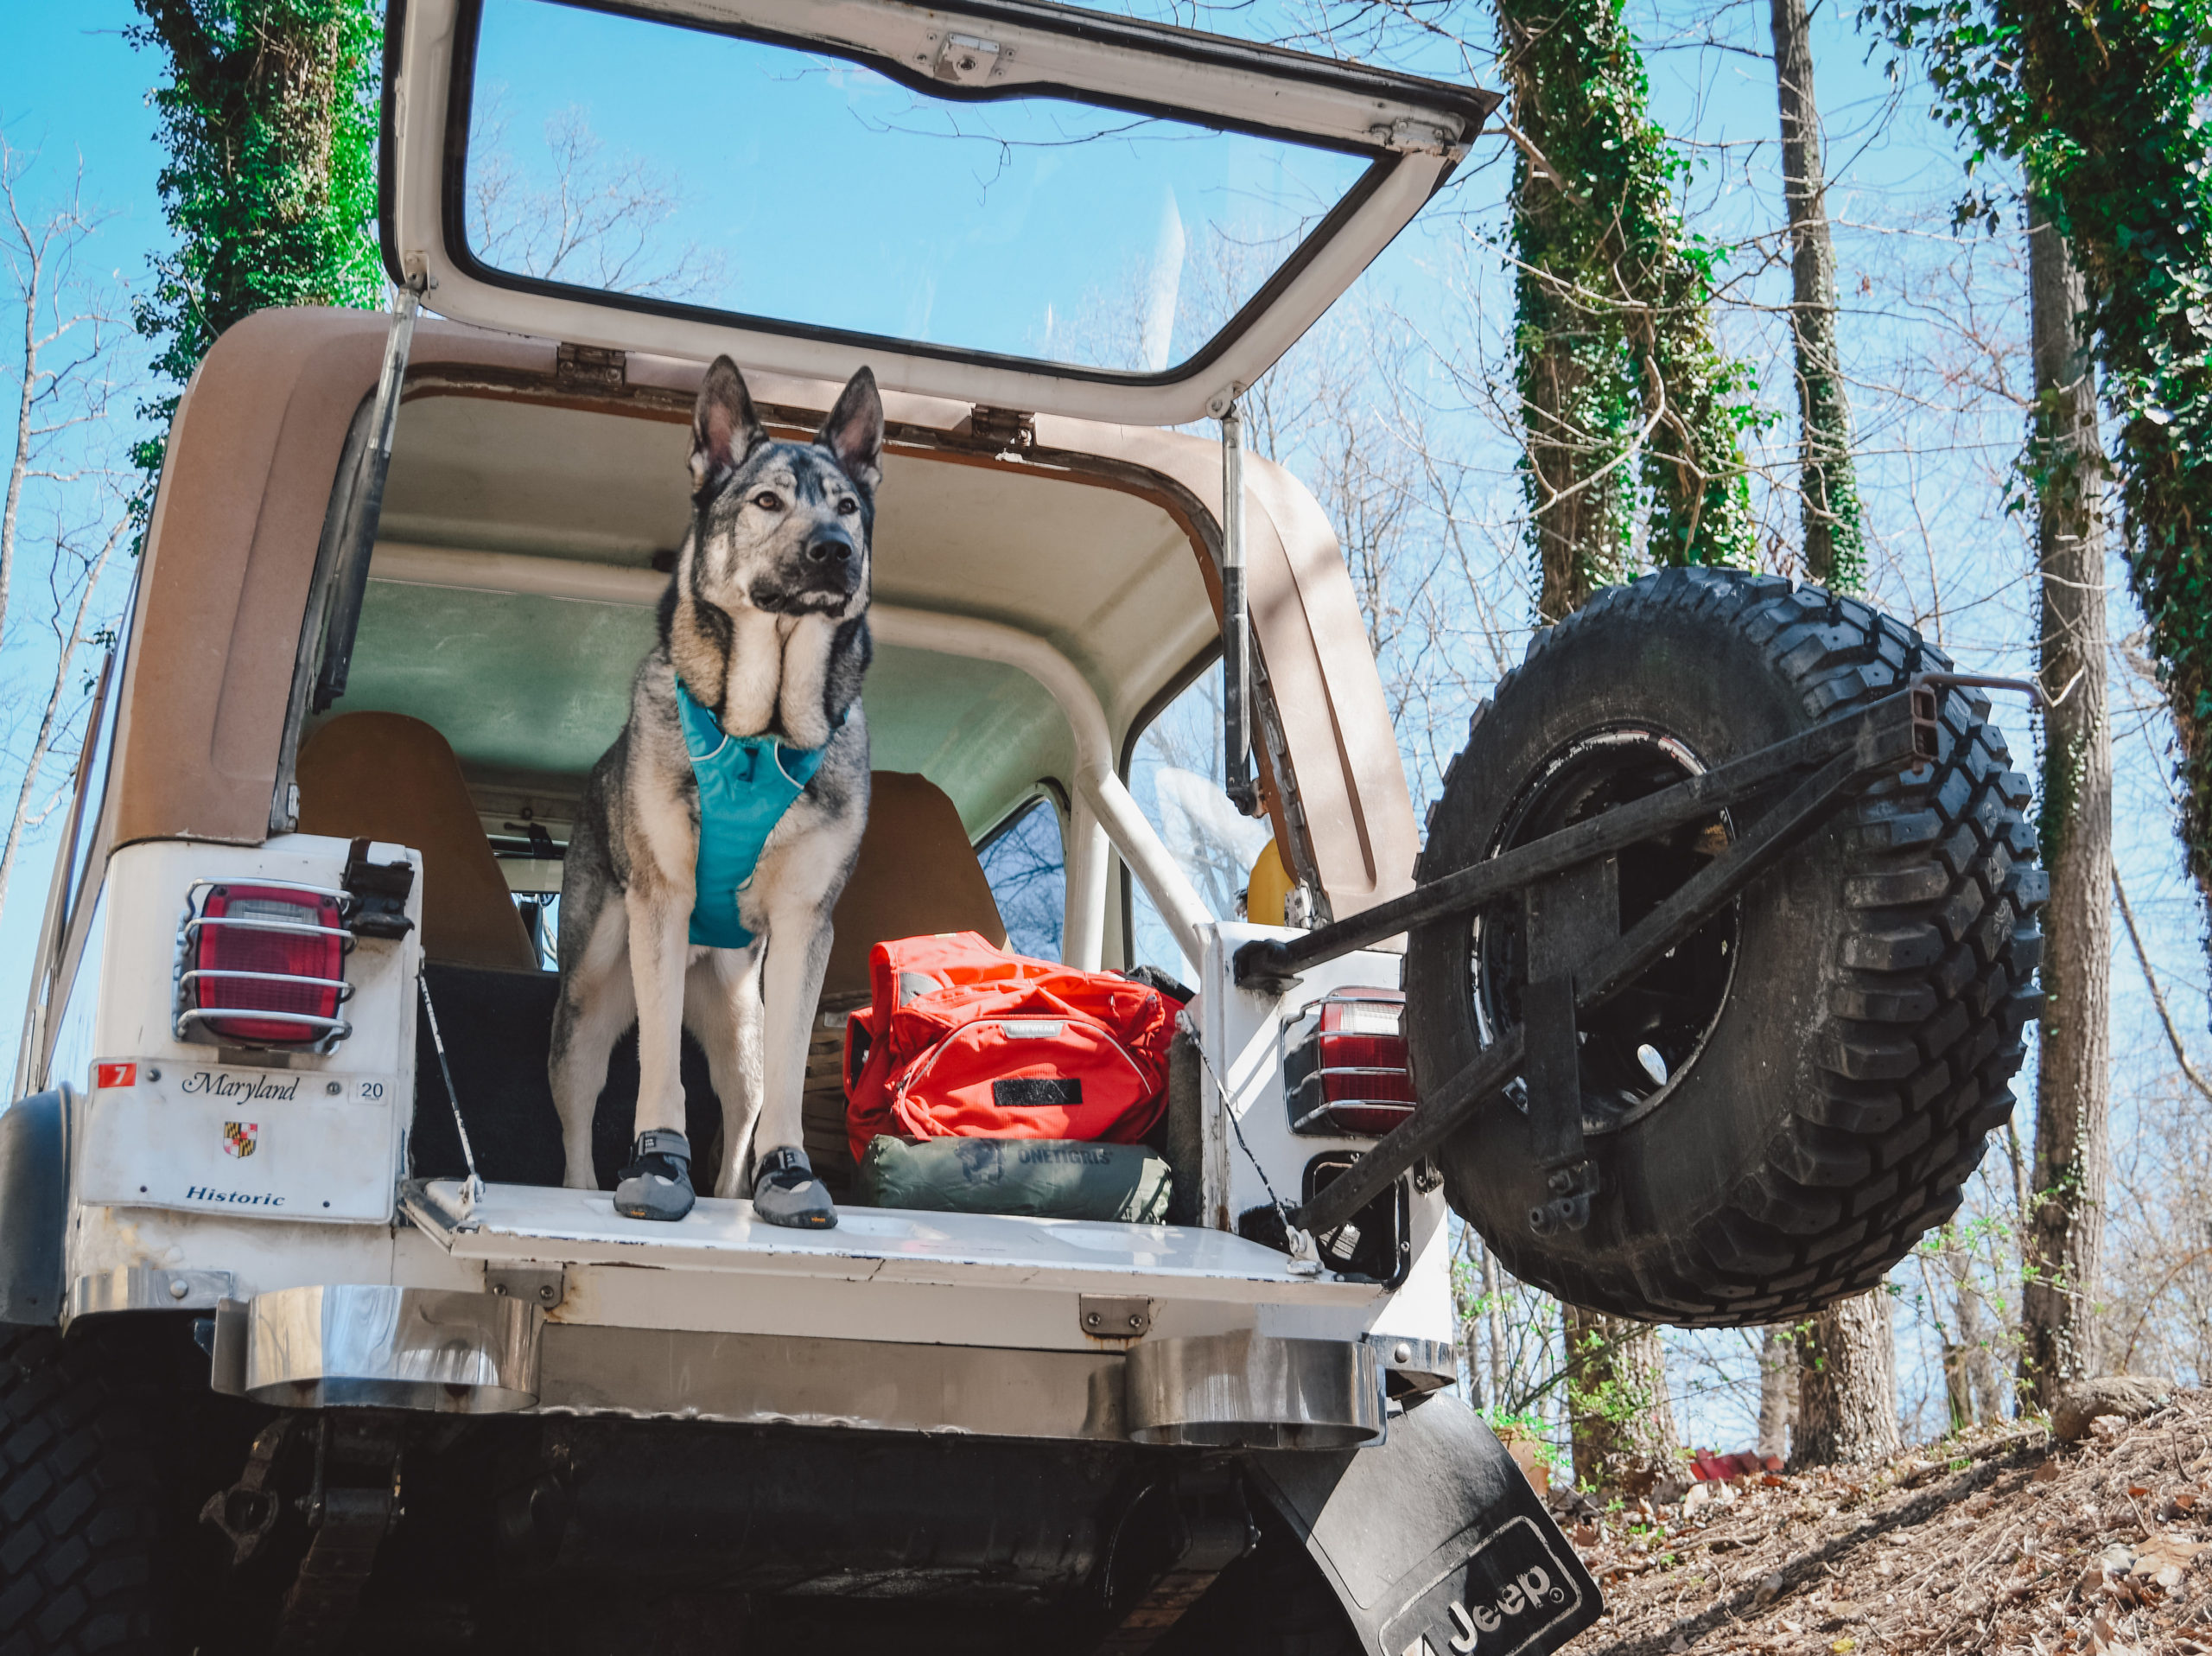 Indie the german shepherd dog in the jeep and ready to go for a hike